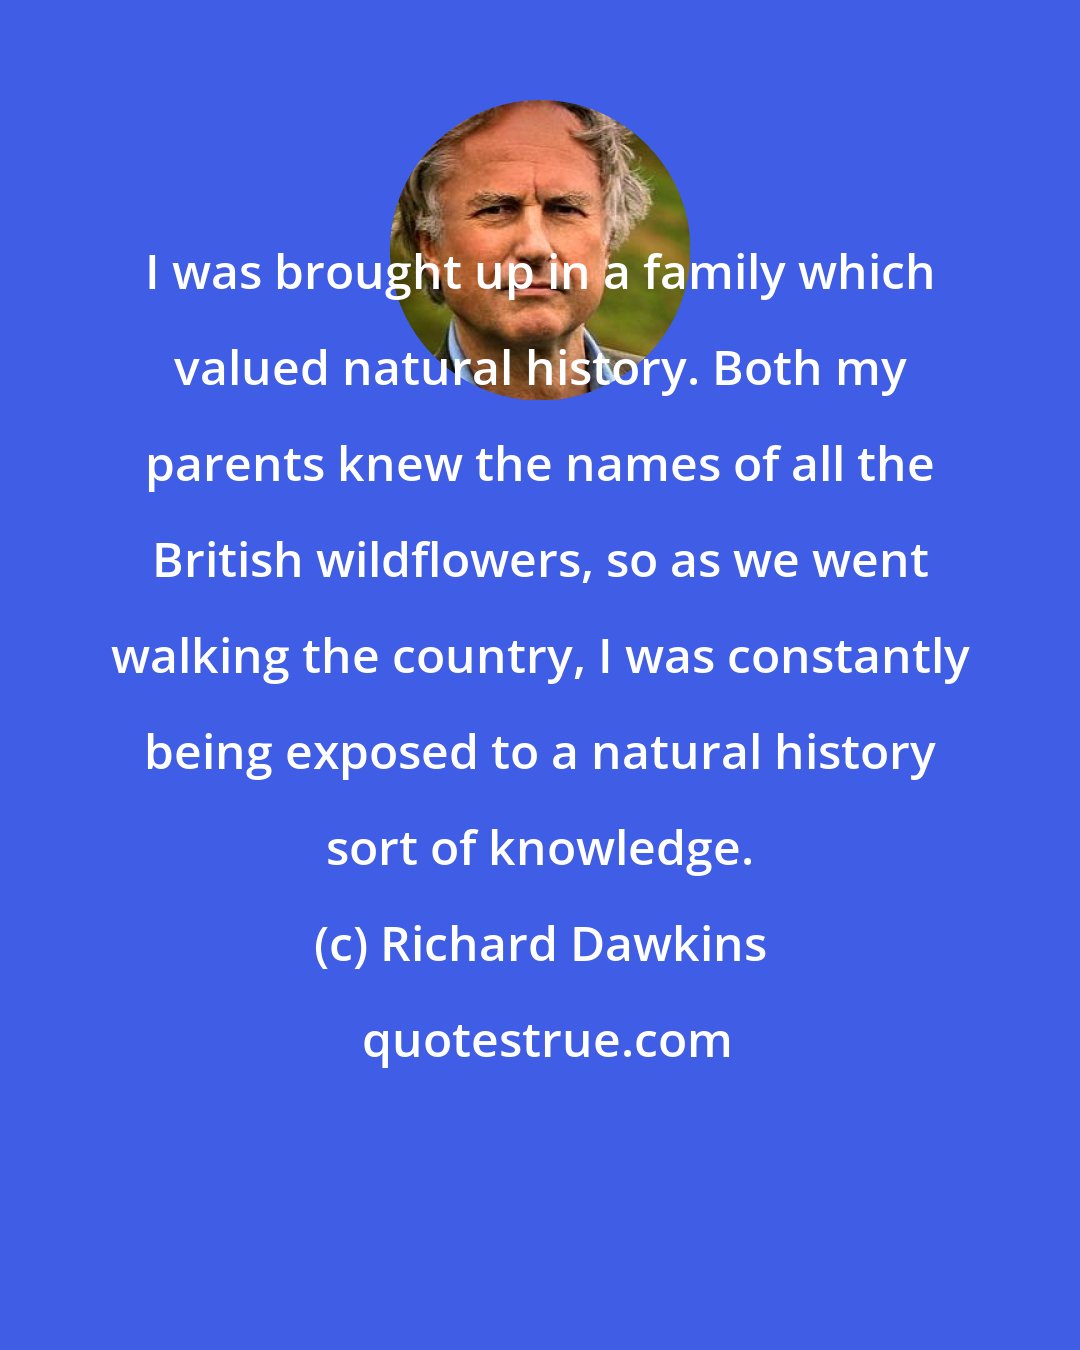 Richard Dawkins: I was brought up in a family which valued natural history. Both my parents knew the names of all the British wildflowers, so as we went walking the country, I was constantly being exposed to a natural history sort of knowledge.